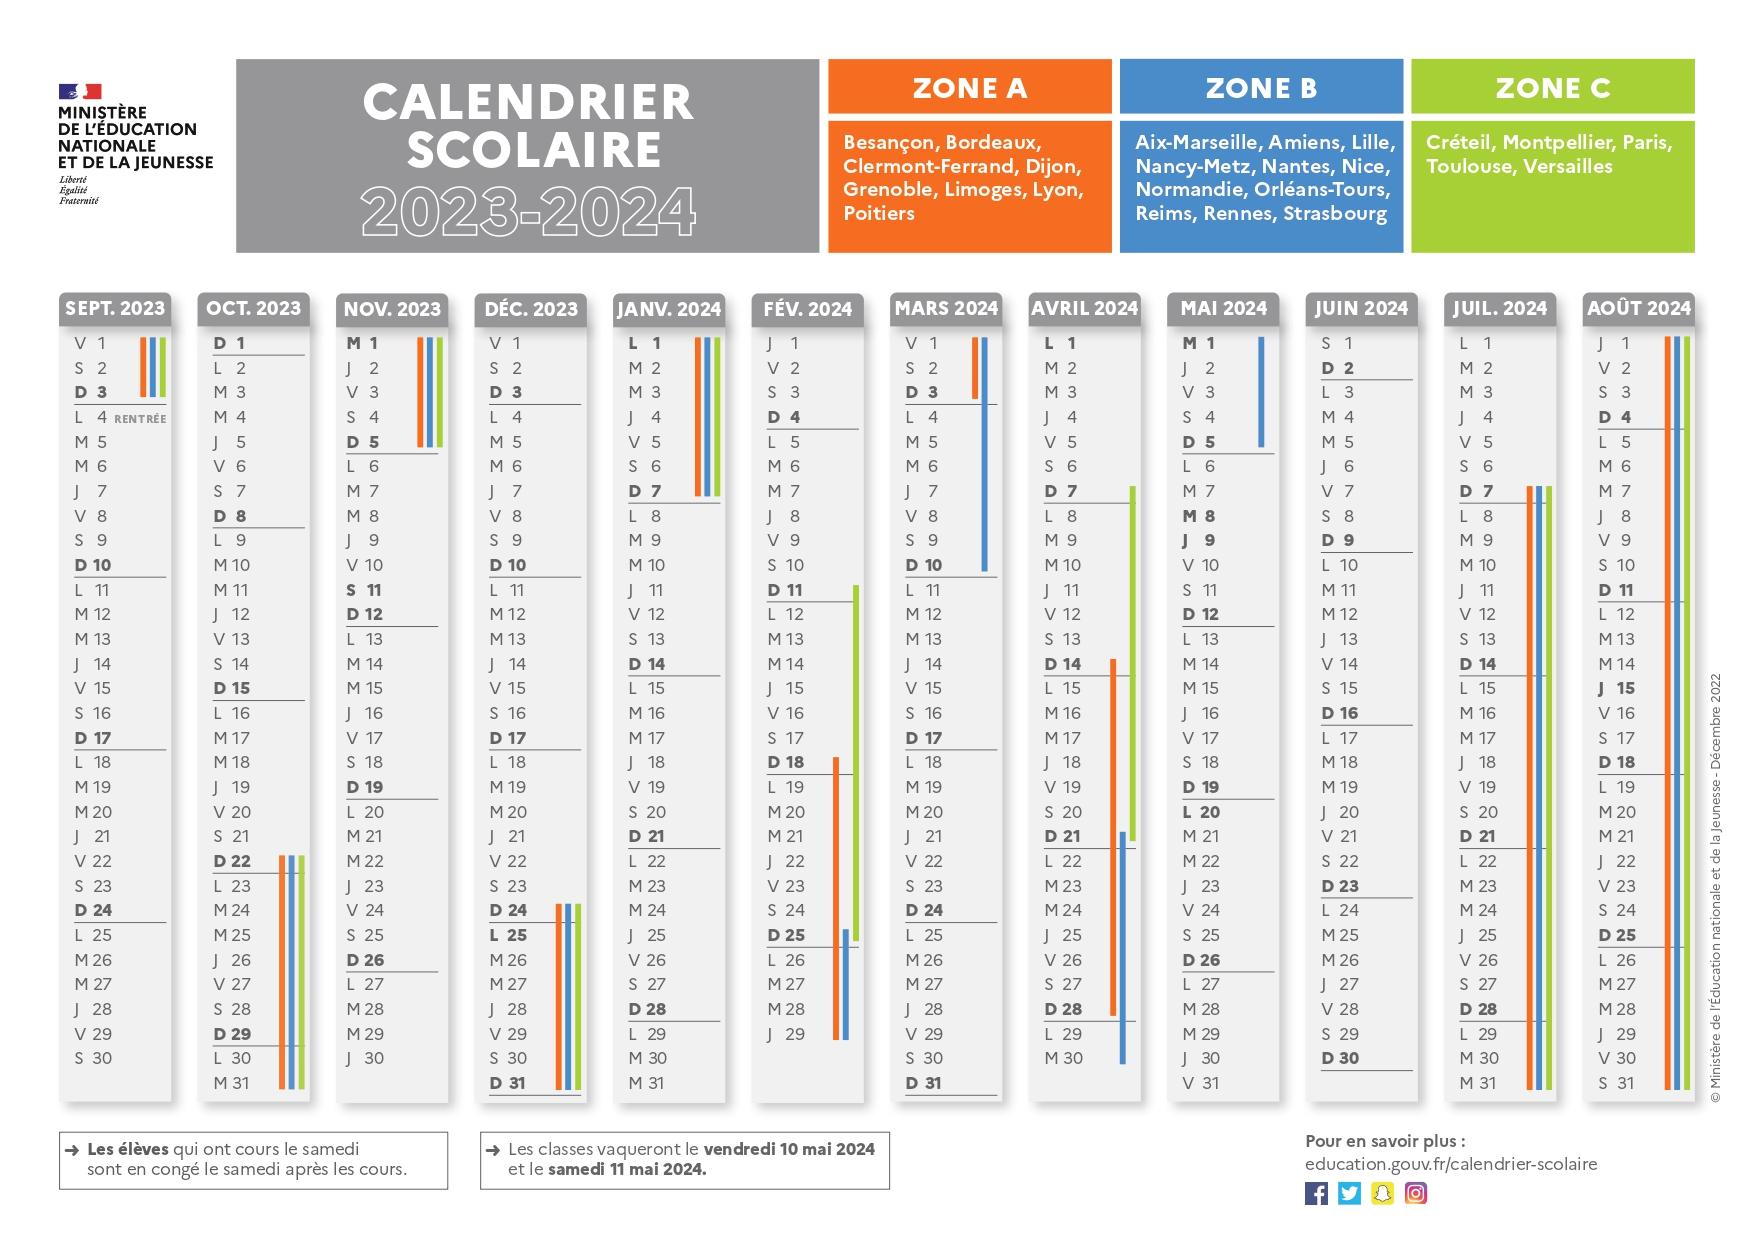 Calendrier scolaire 2023 2024 119692 pages to jpg 0001